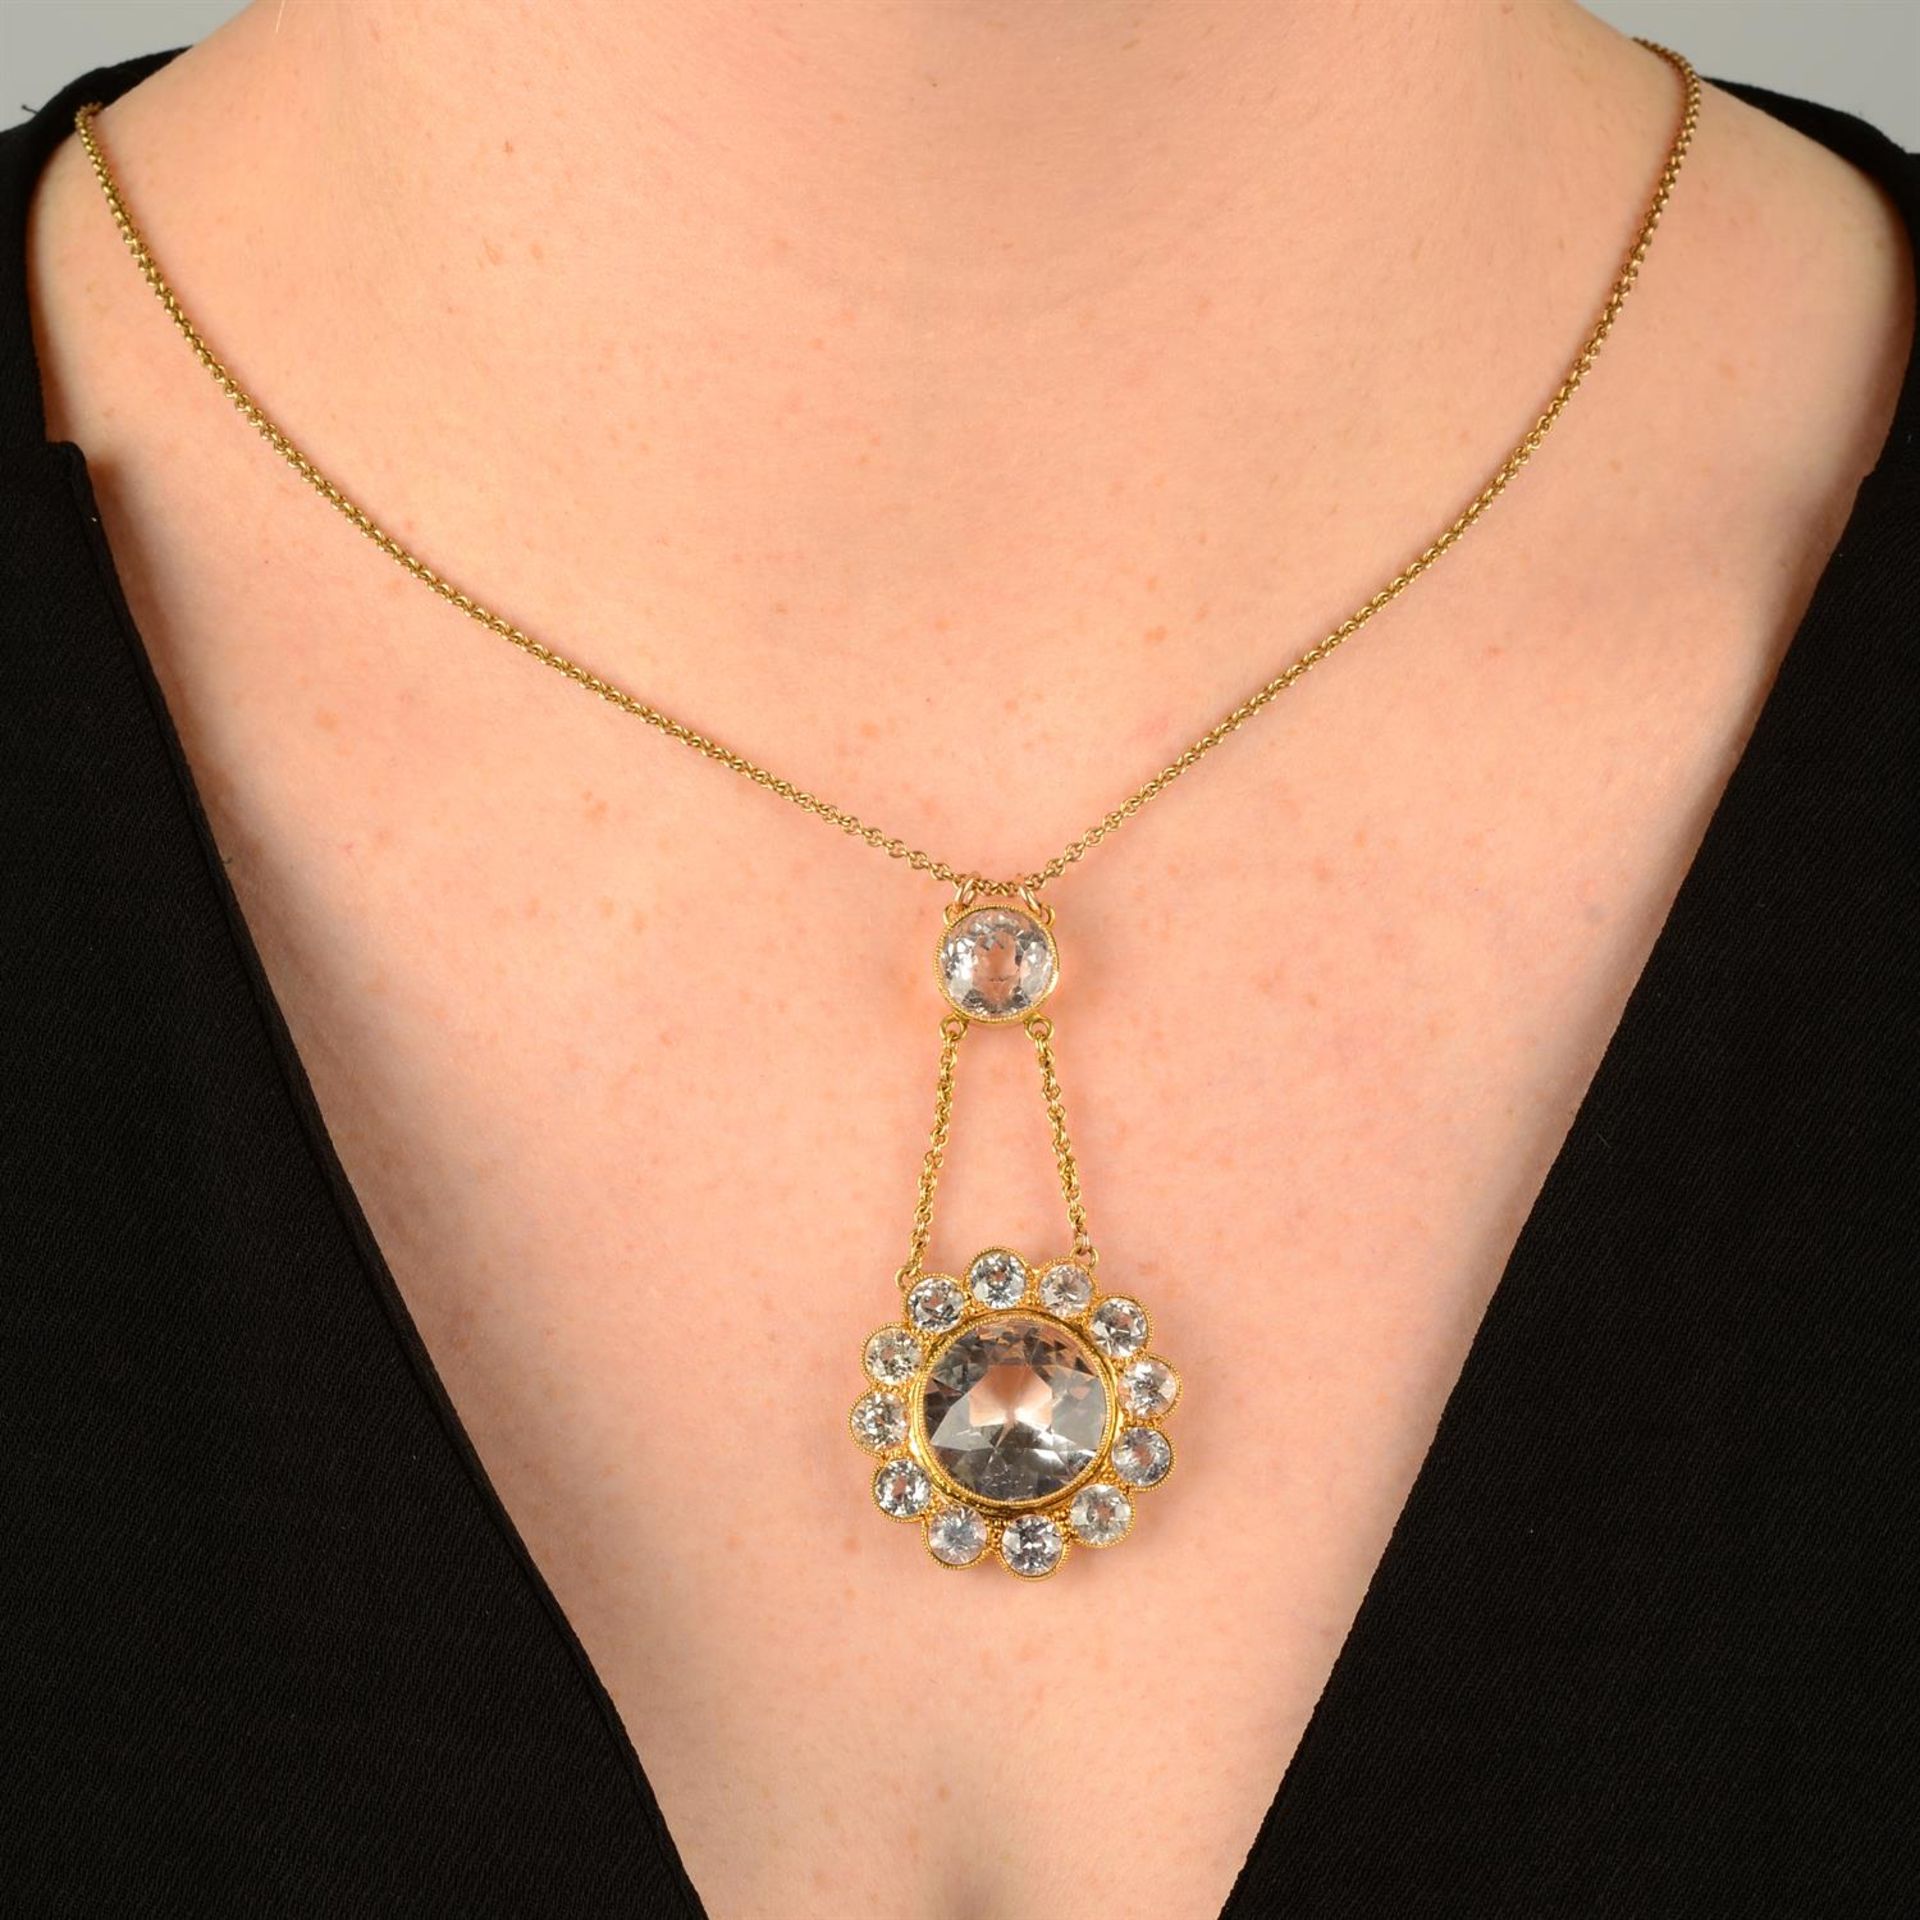 A composite 19th century gold colourless and light blue topaz cluster pendant, on chain. - Image 5 of 5